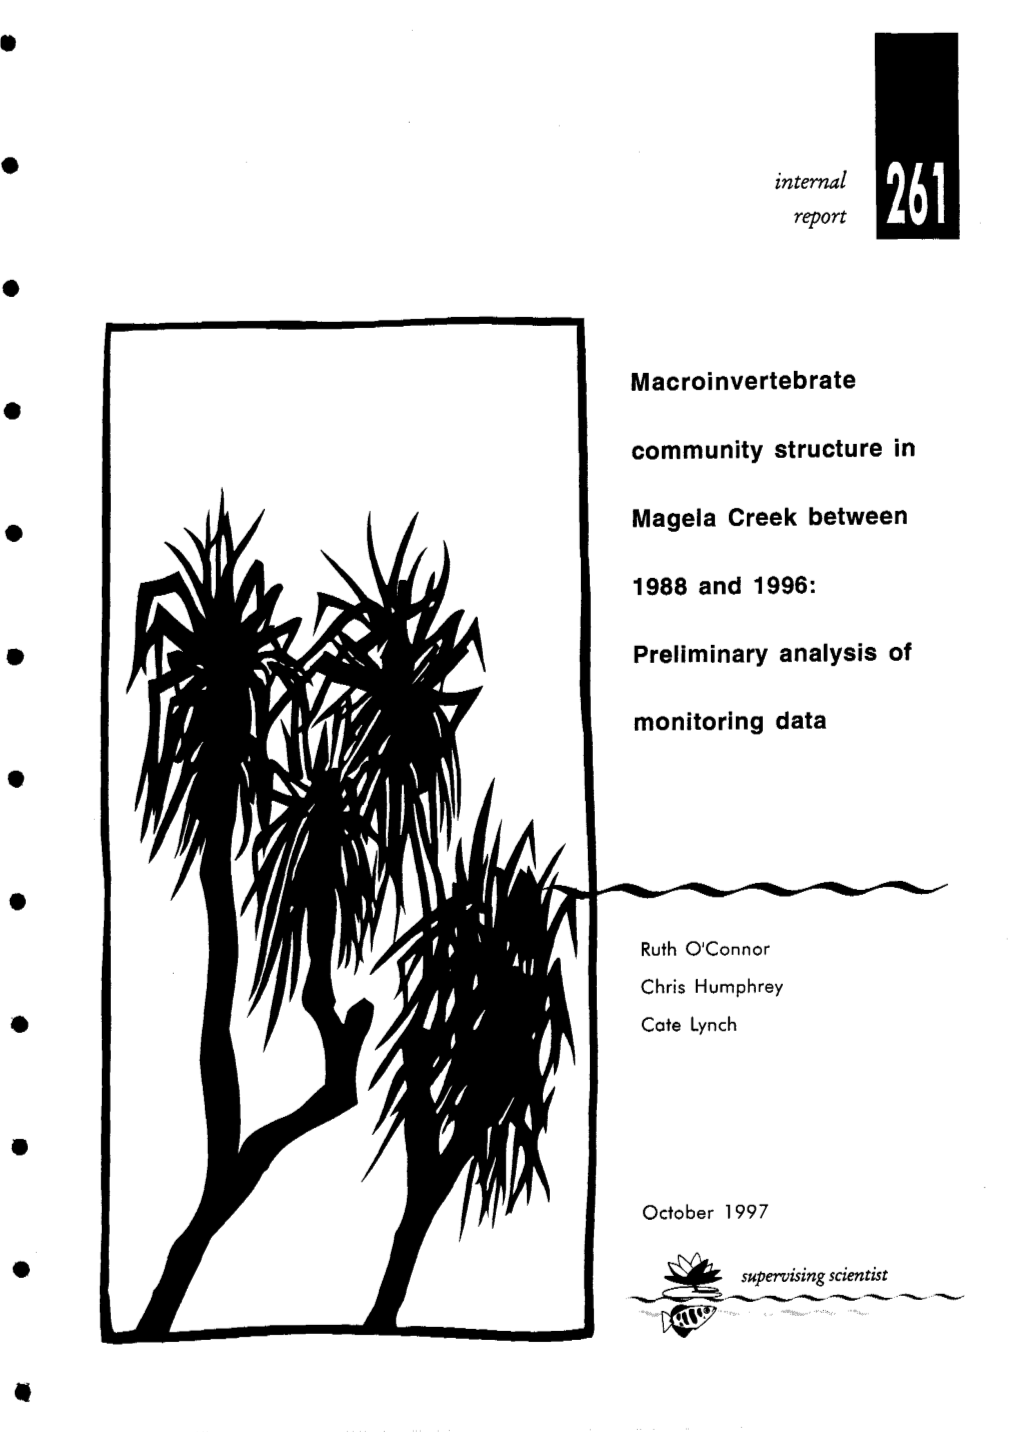 Internal Report 261-Macroinvertebrate Community Structure in Magela Creek Between 1988 and 1996: Preliminary Analysis of Monitor